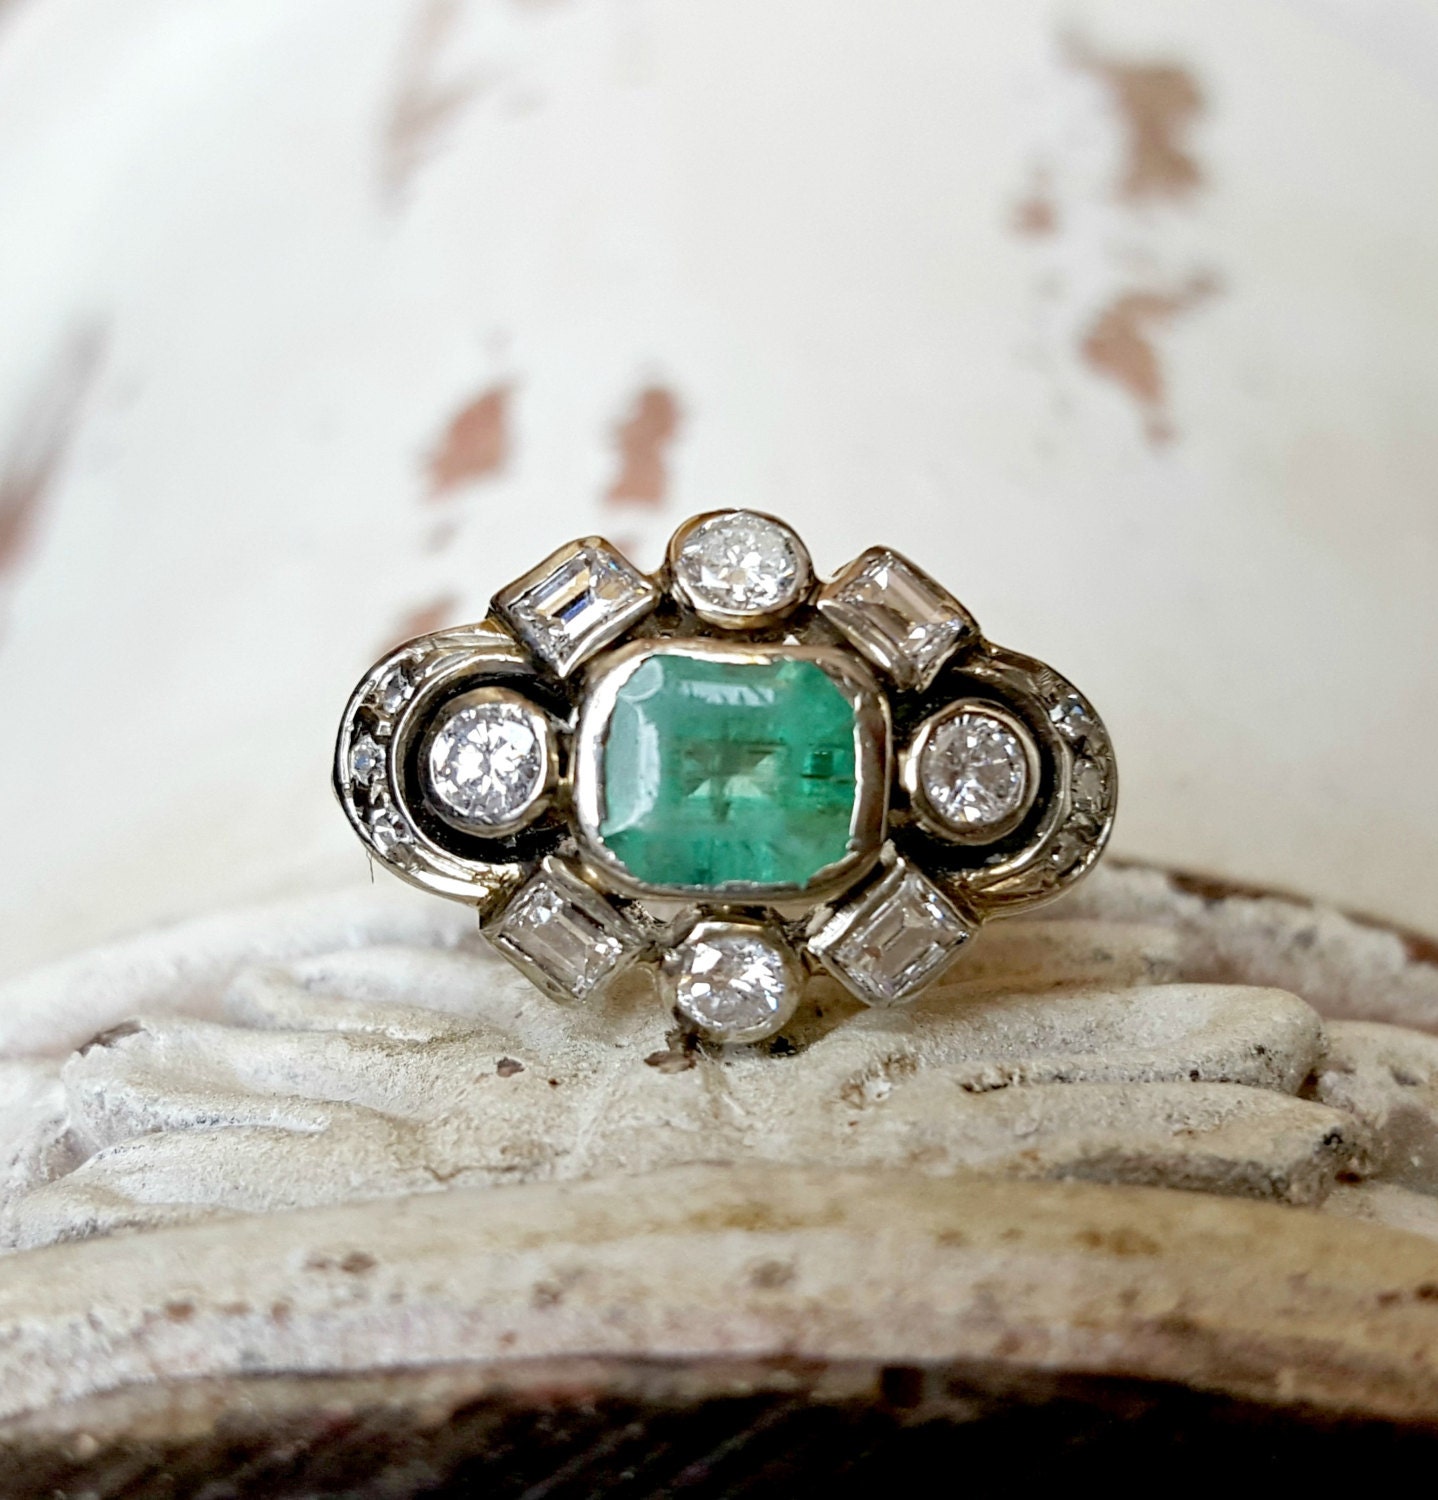 Vintage Antique Art Deco Emerald and Diamond Ring in 14k White